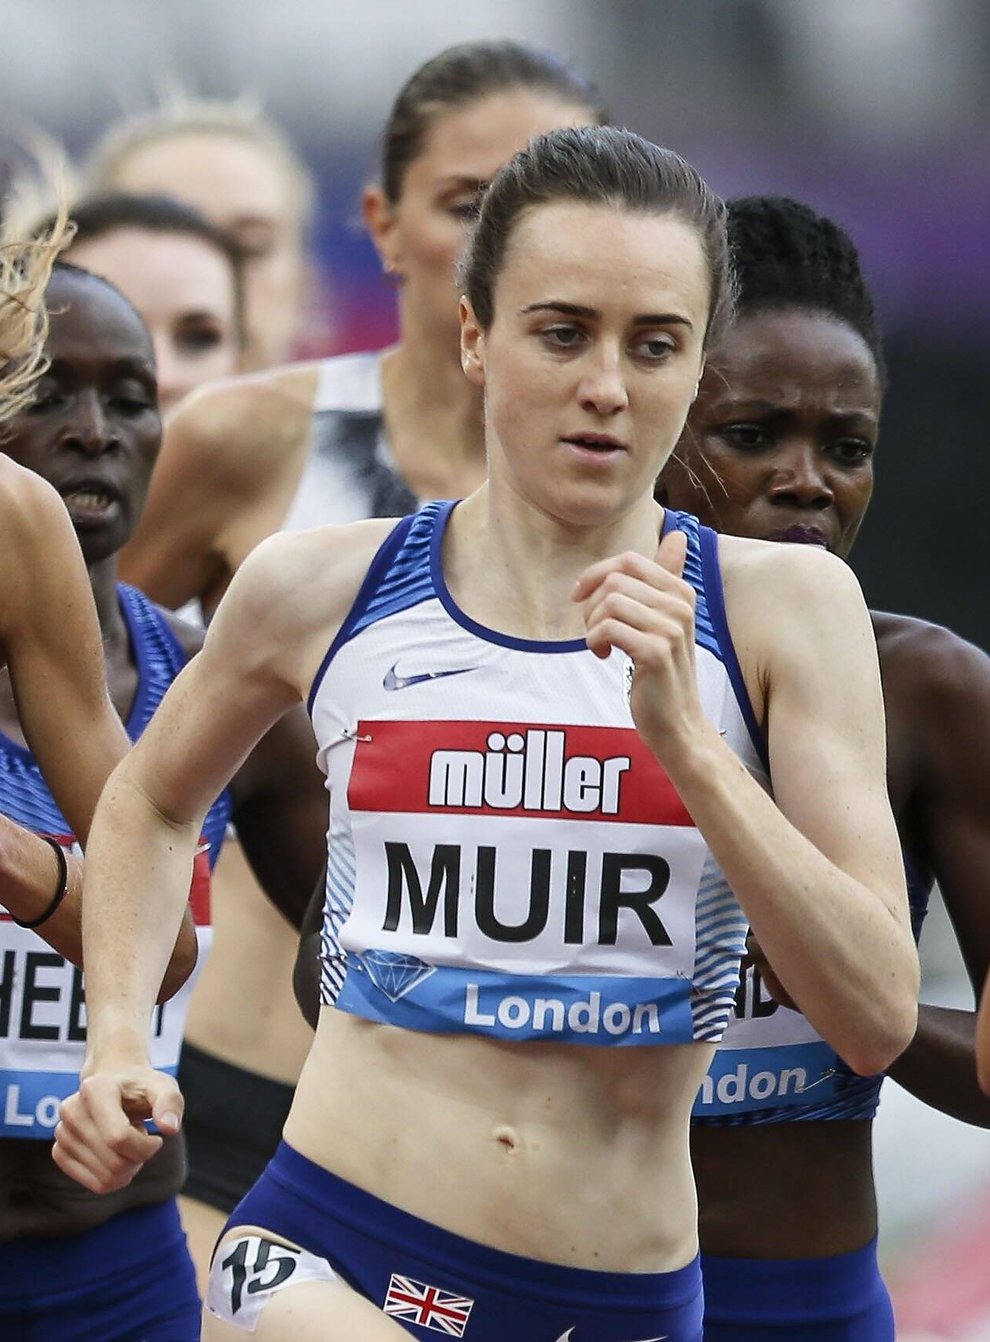 Laura Muir will not be travelling to a training camp in Arizona (PA Images)